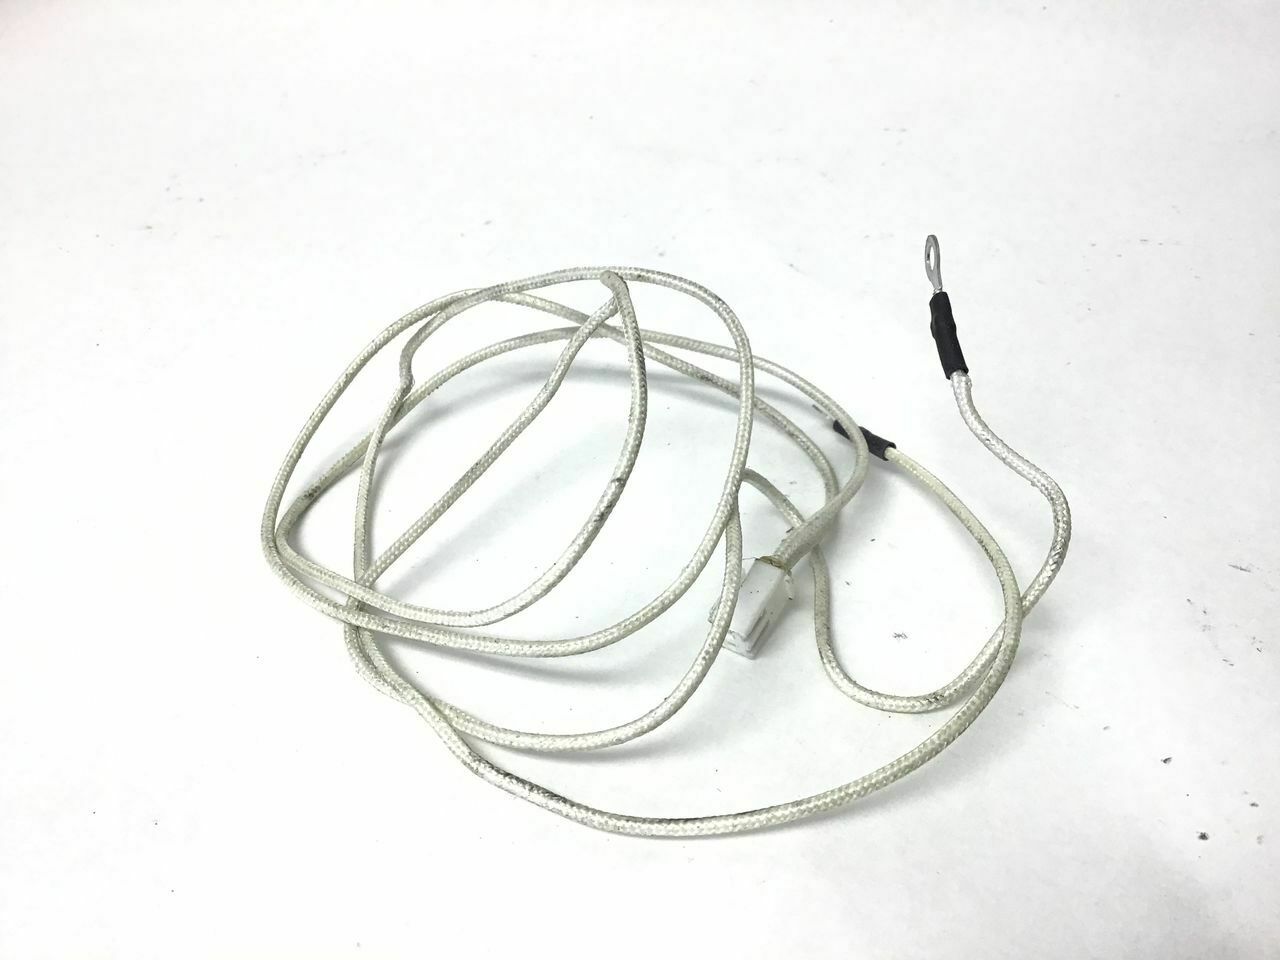 True Fitness TL1000 Traverse Lateral Trainer Resister Union Cable (Used)